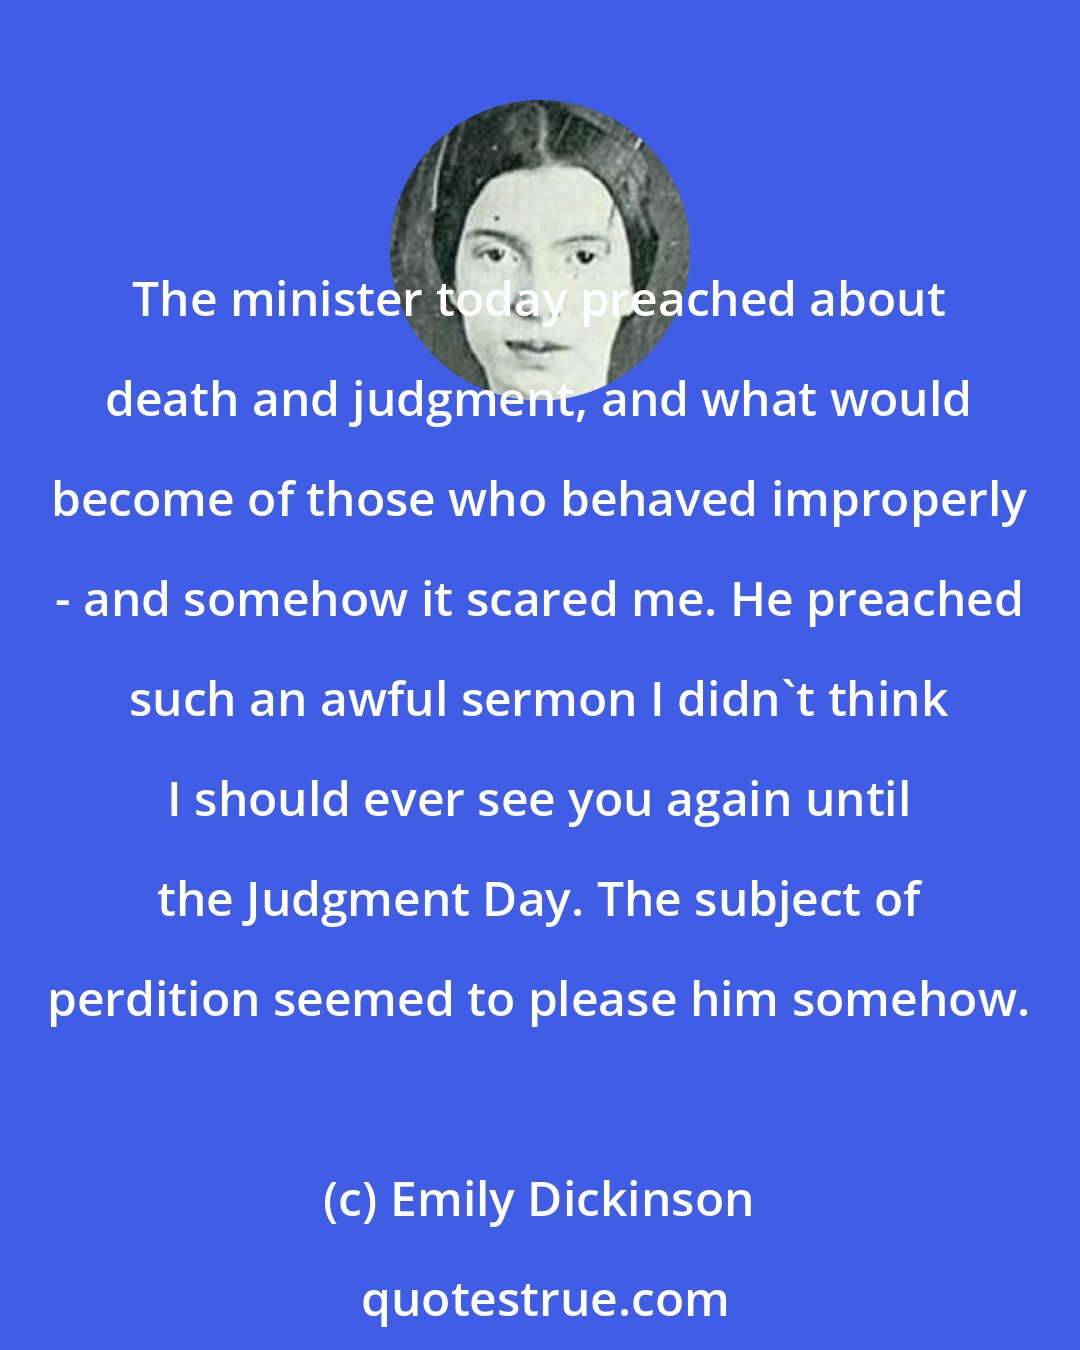 Emily Dickinson: The minister today preached about death and judgment, and what would become of those who behaved improperly - and somehow it scared me. He preached such an awful sermon I didn't think I should ever see you again until the Judgment Day. The subject of perdition seemed to please him somehow.